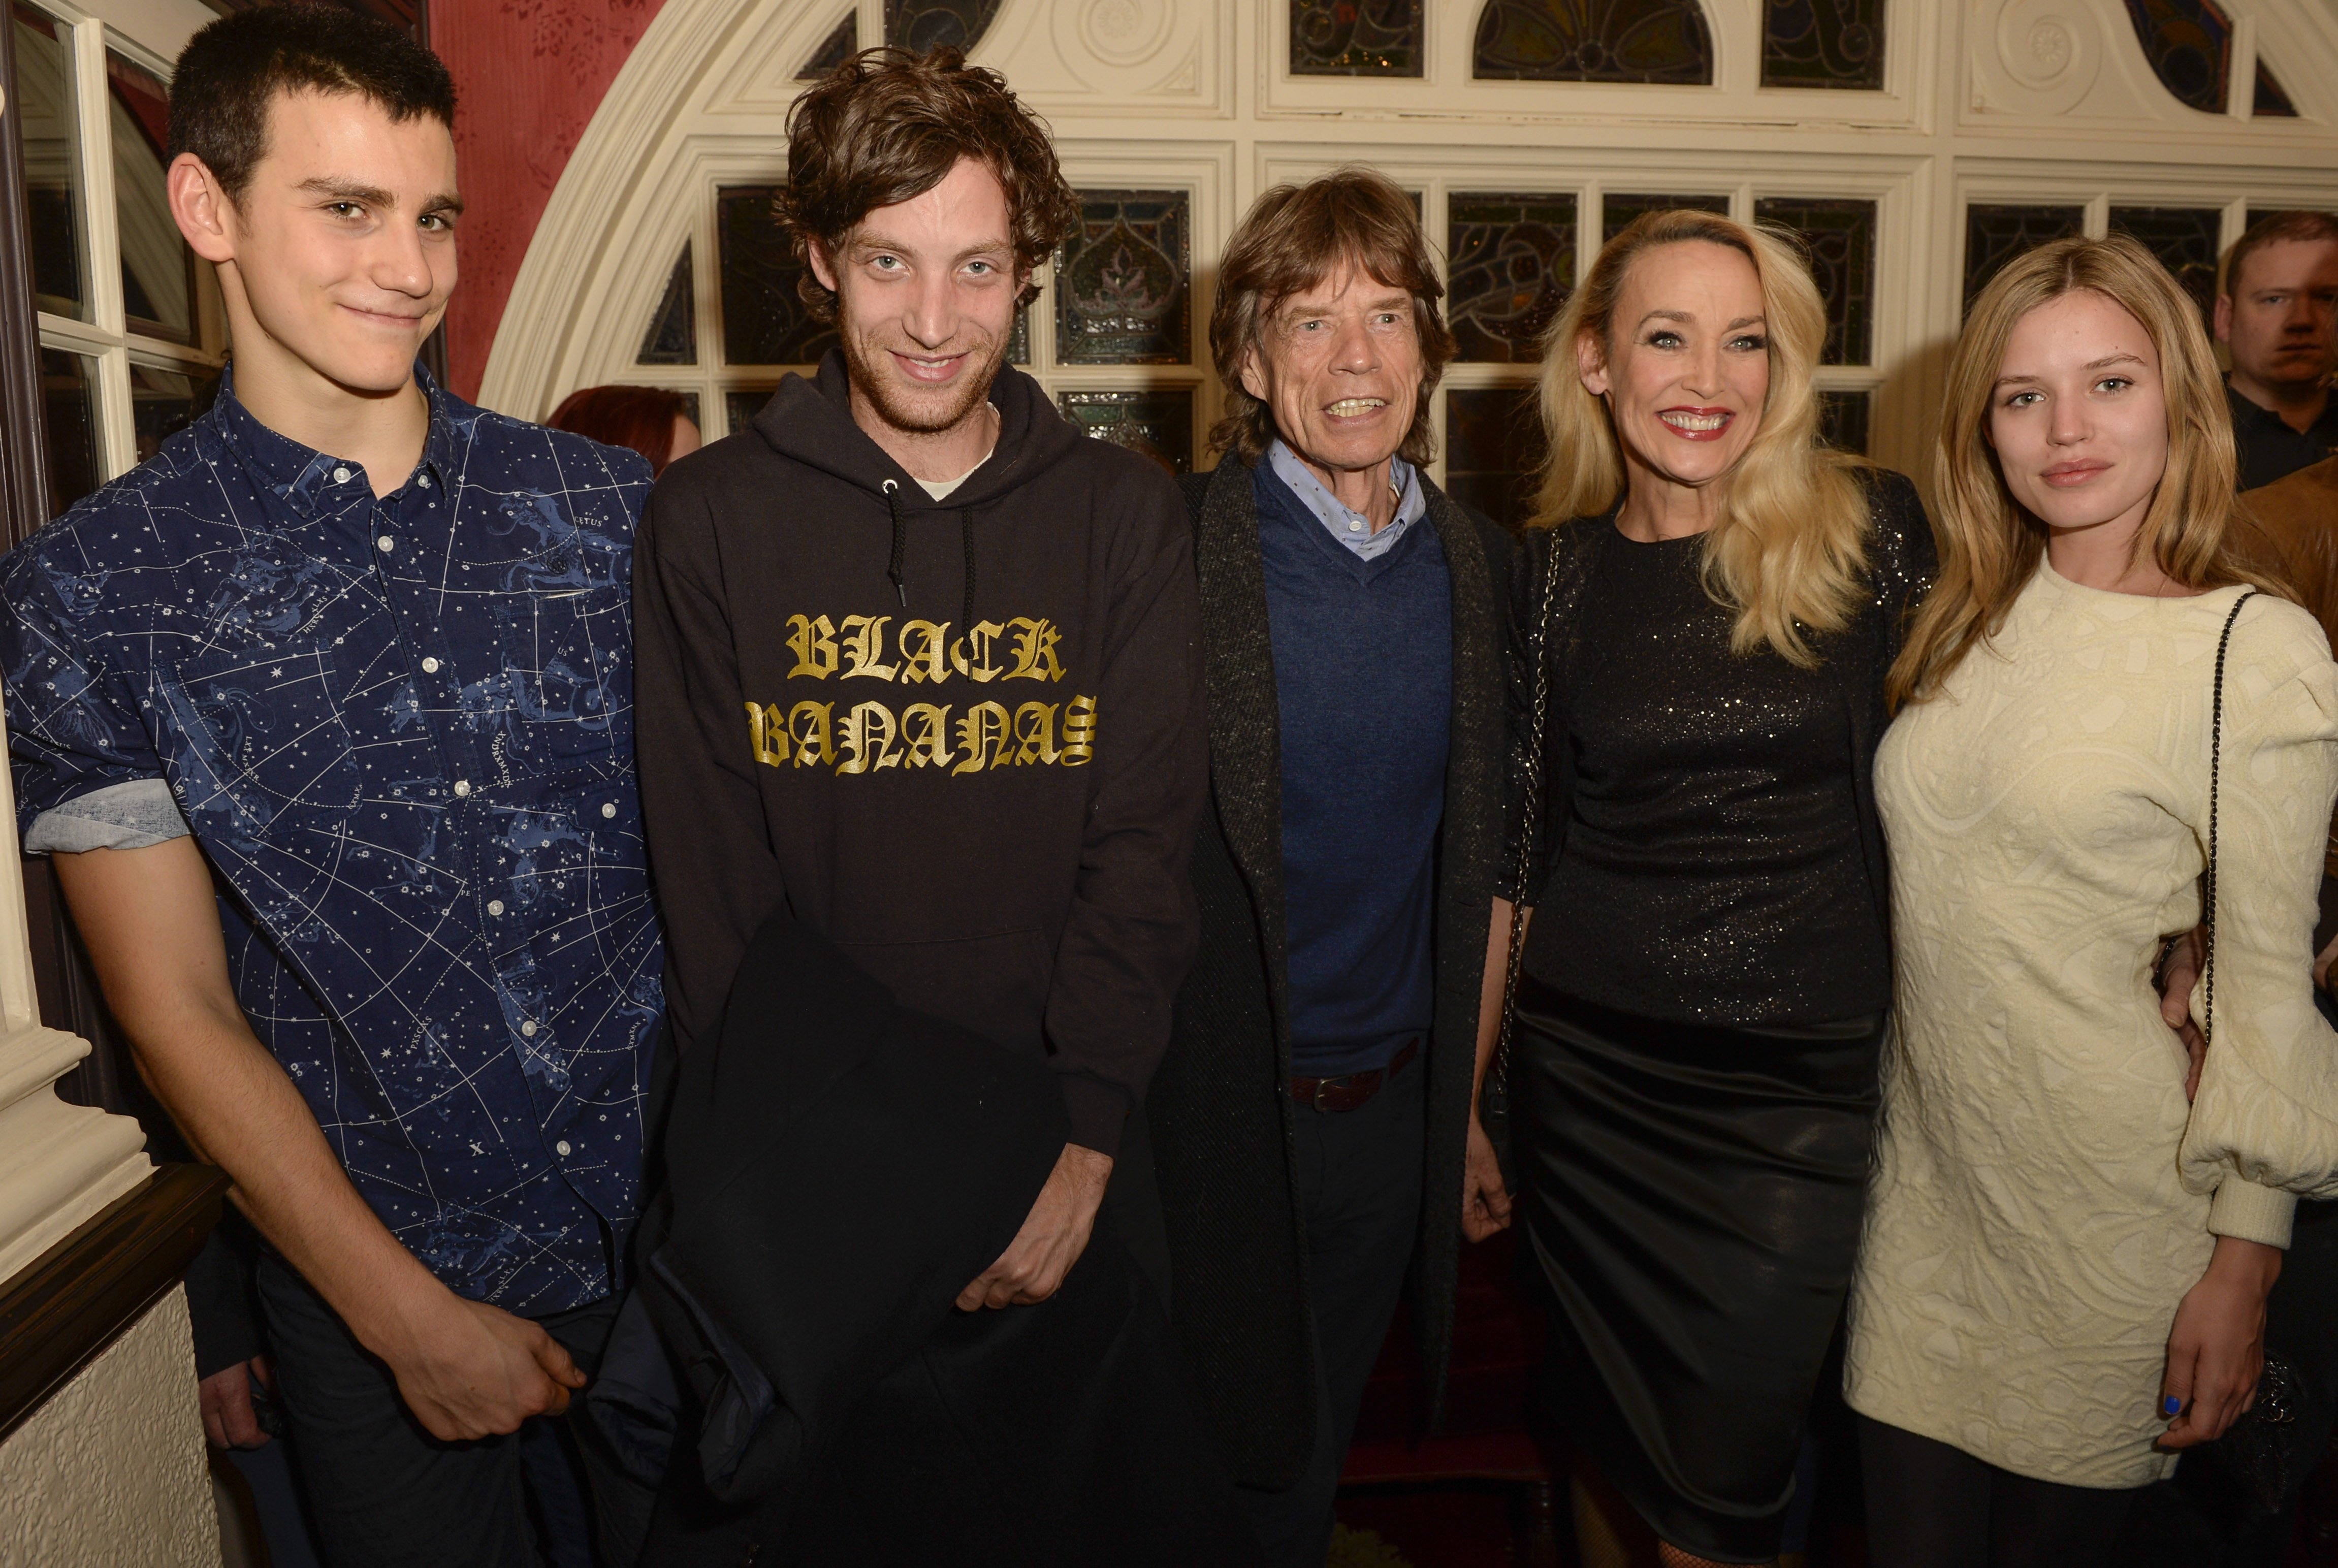 Gabriel Jagger, James Jagger, Sir Mick Jagger, Jerry Hall and Georgia Jagger at the night performance of "Snow White And The Seven Dwarfs" at the Richmond Theatre on December 11, 2014 | Photo: Getty Images